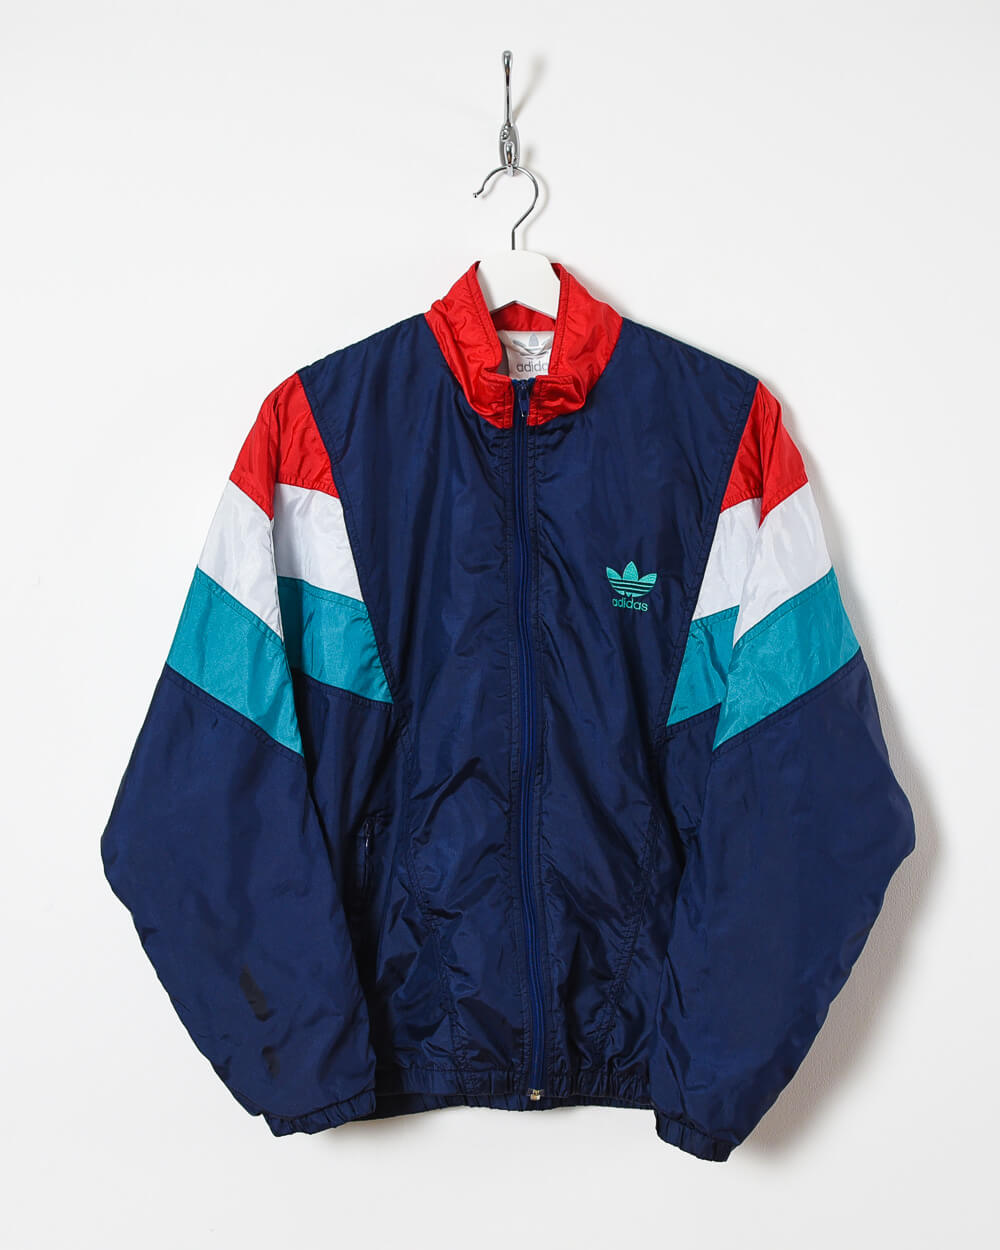 Adidas Shell Jacket - Small - Domno Vintage 90s, 80s, 00s Retro and Vintage Clothing 